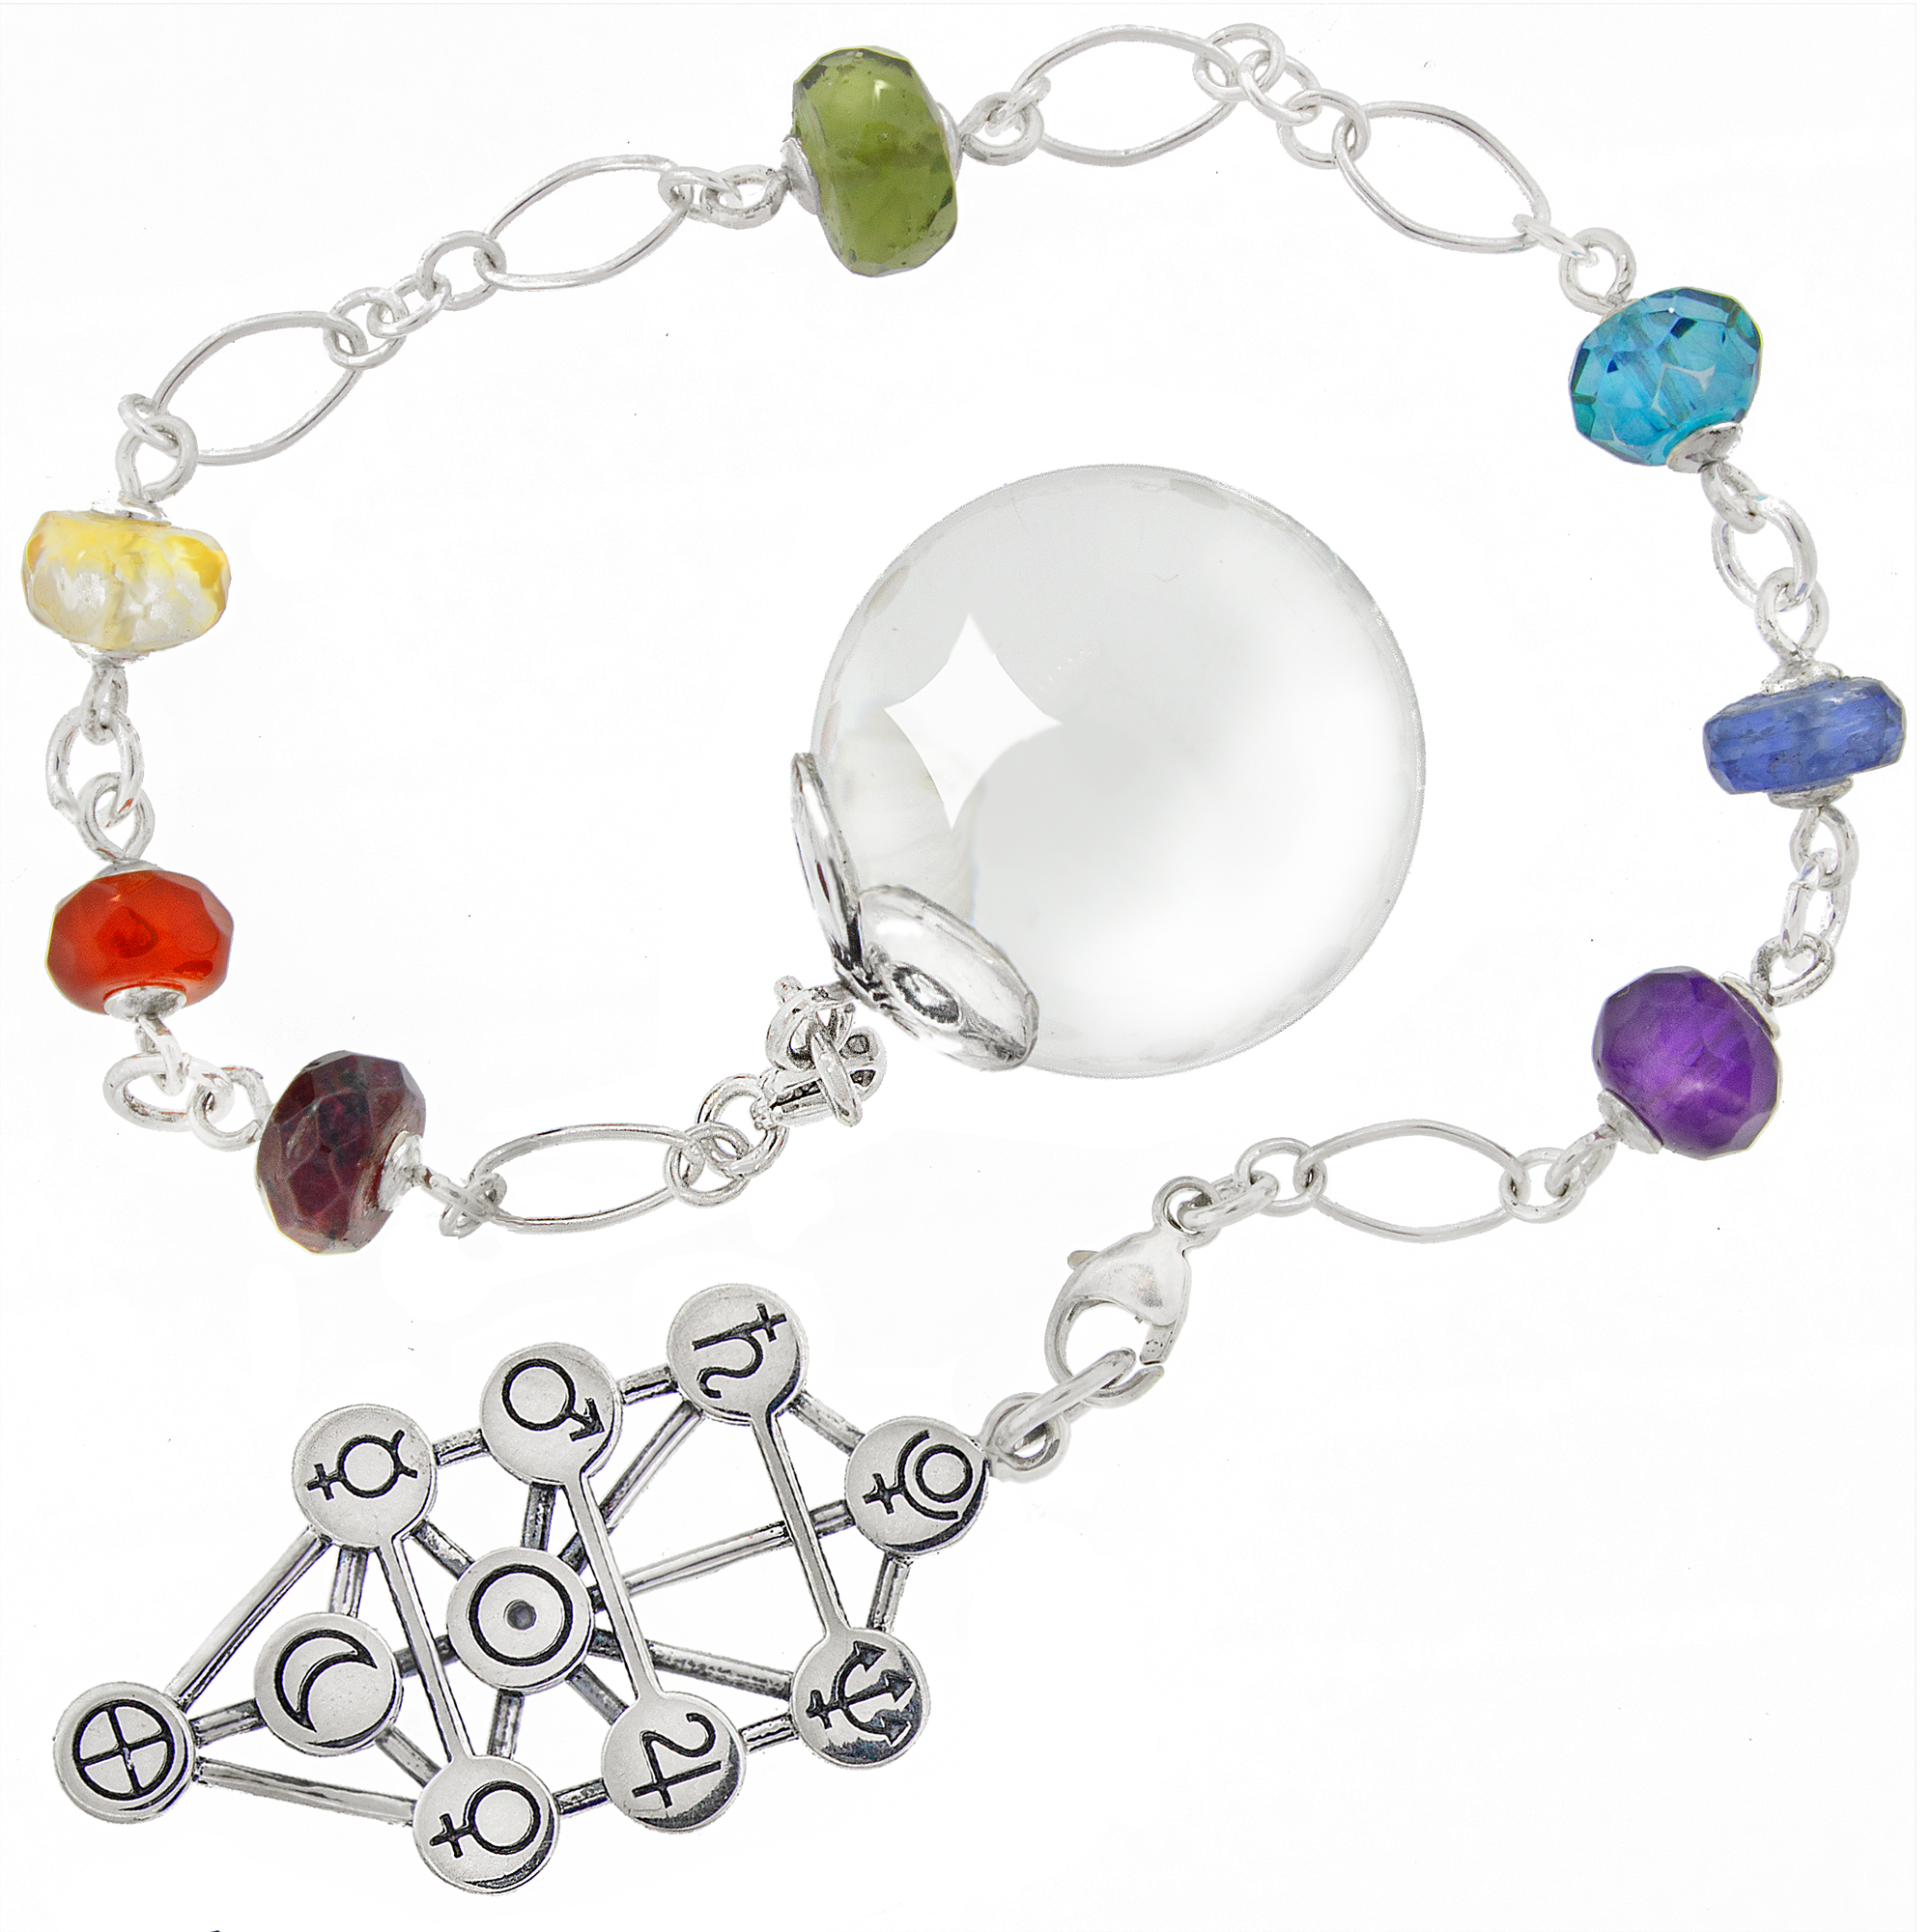 One of a Kind #371 - Clear Quartz, Gemstone, and Sterling Silver Pendulum by Ask Your Pendulum